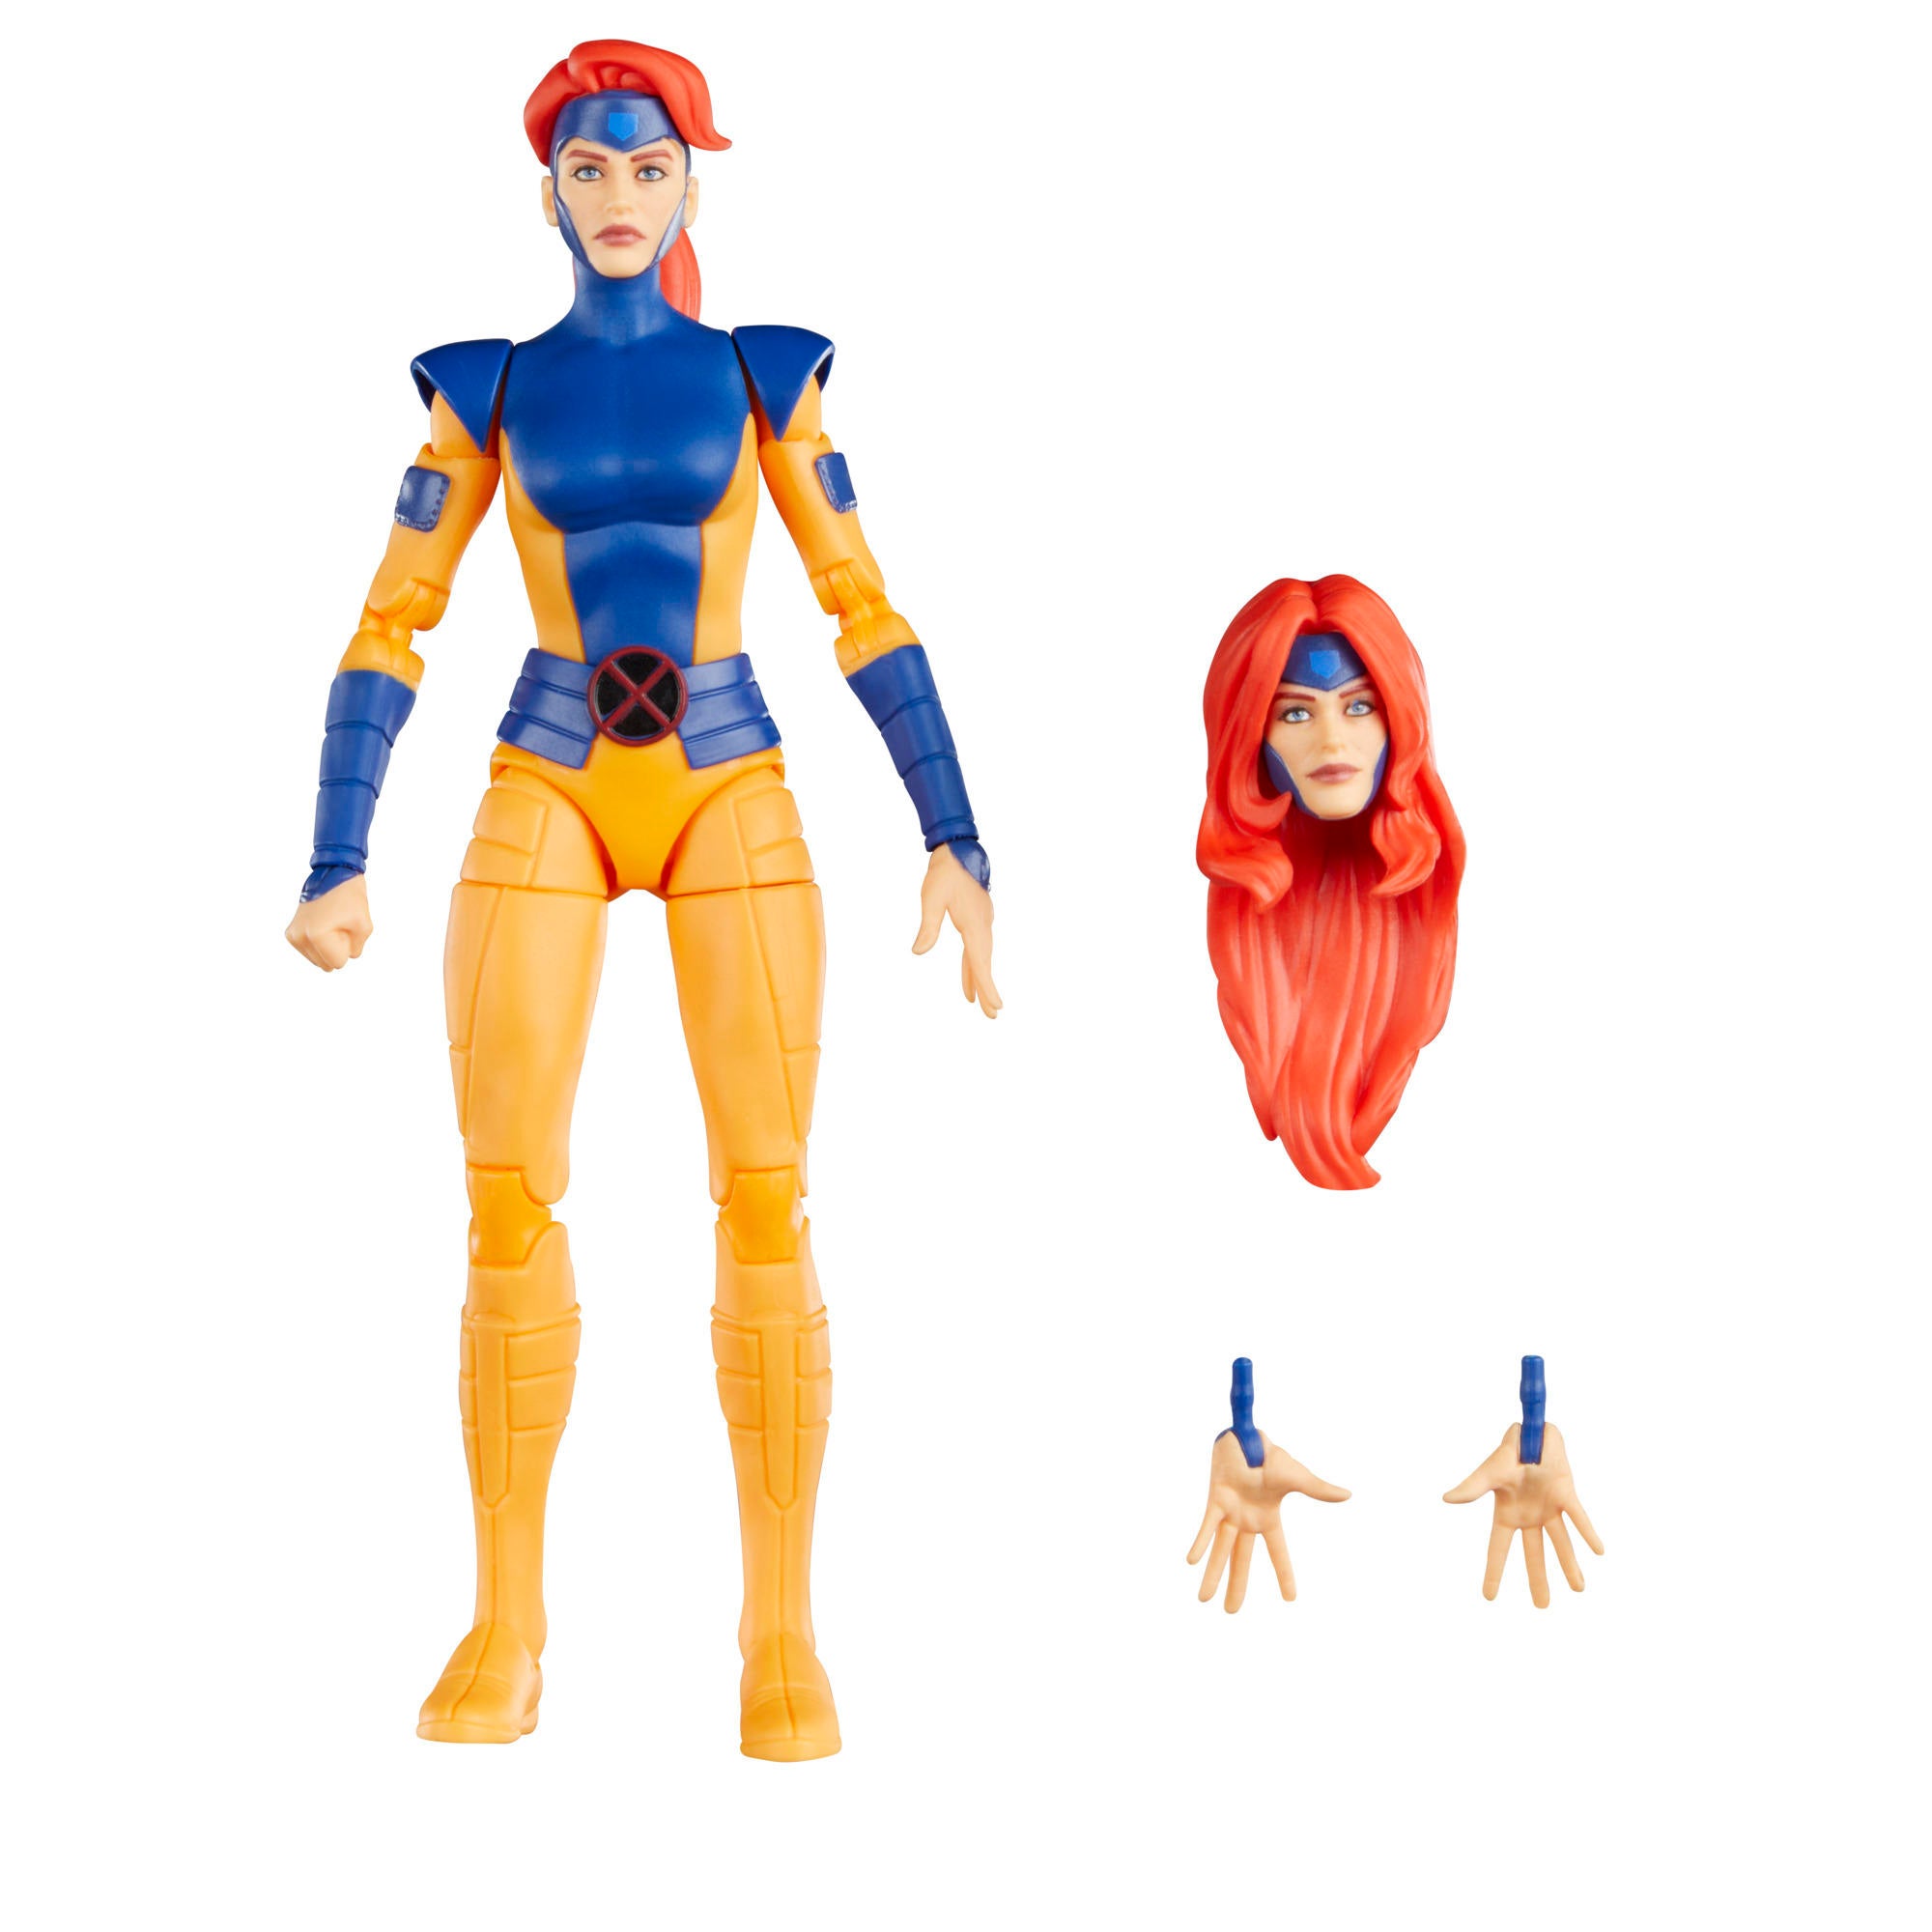 Marvel Legends X-Men '97 Wave 2 Action Figures Are Finally Going Up For ...